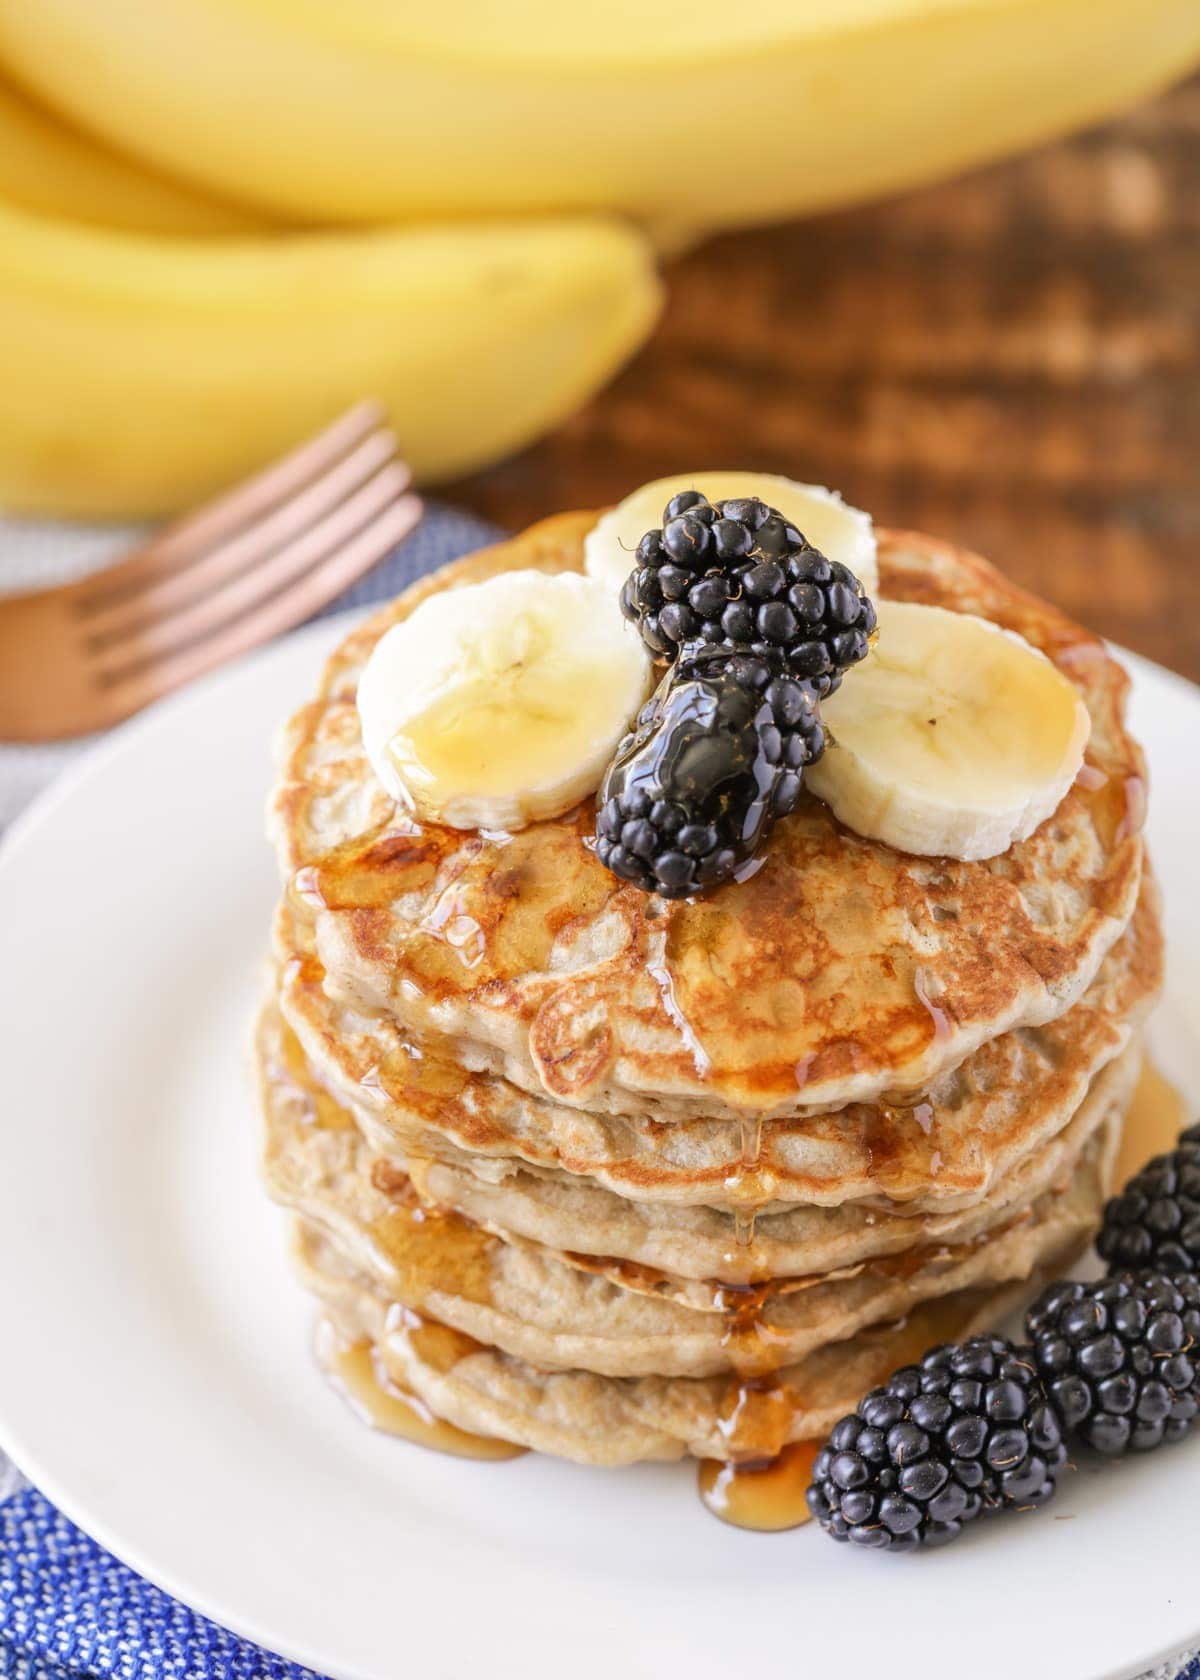 Banana oatmeal pancake recipe with berries and syrup on top